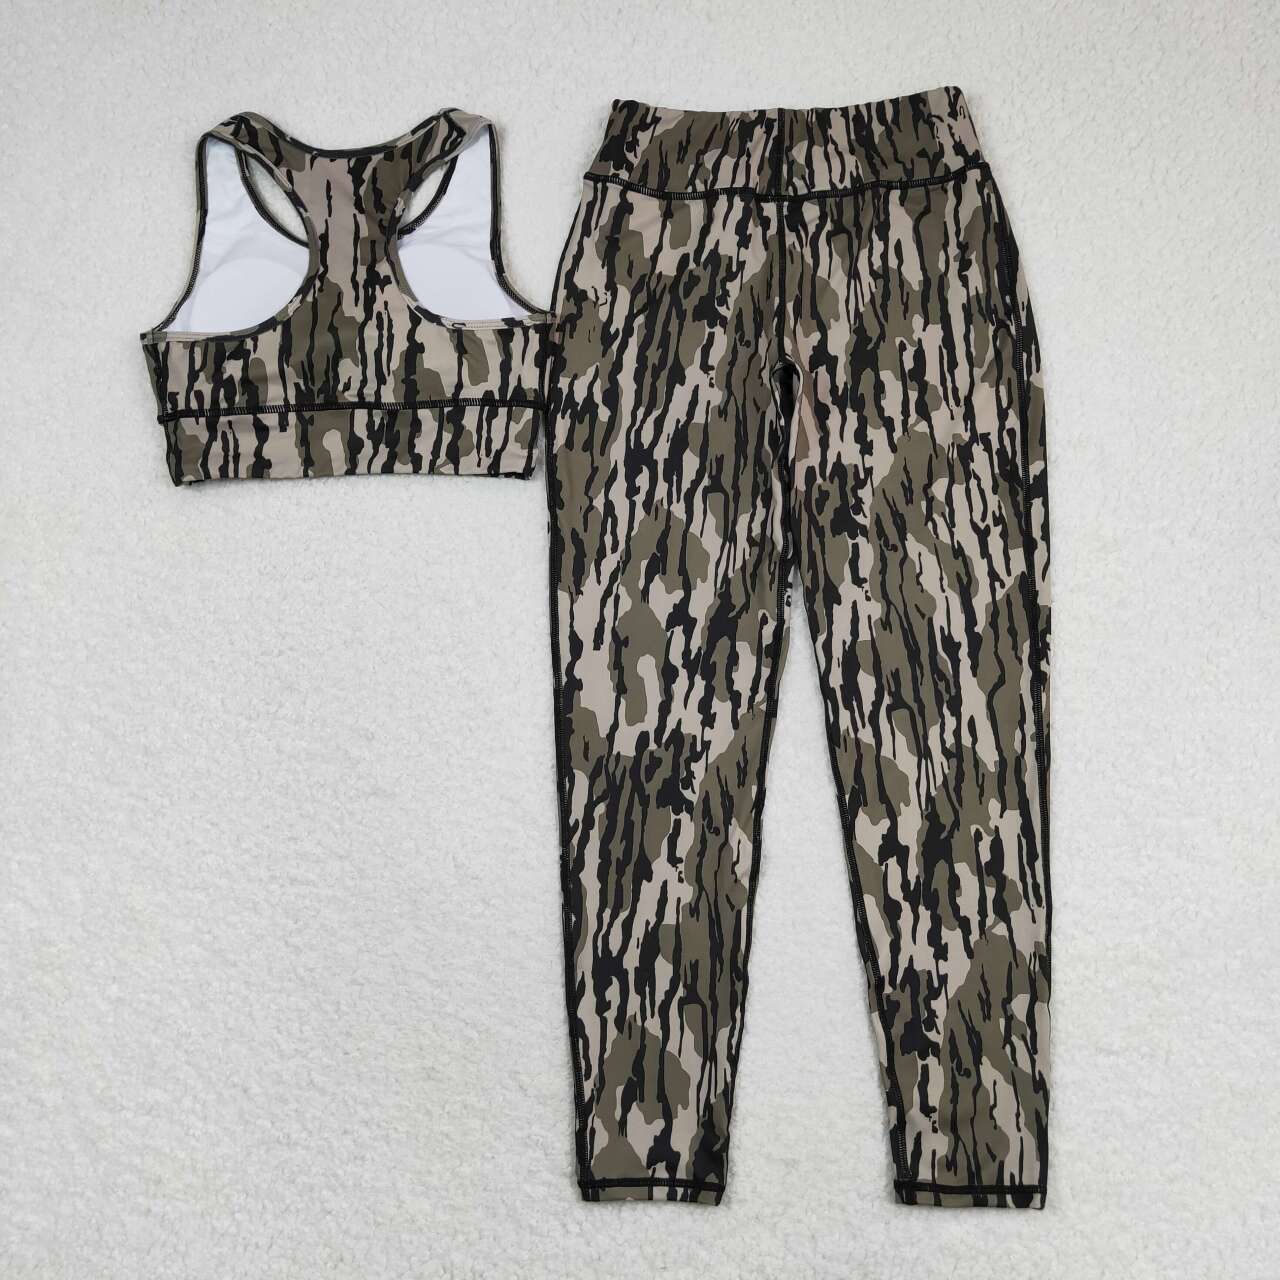 GSPO1461 Adult women's brown and green camouflage sleeveless pants yoga suit